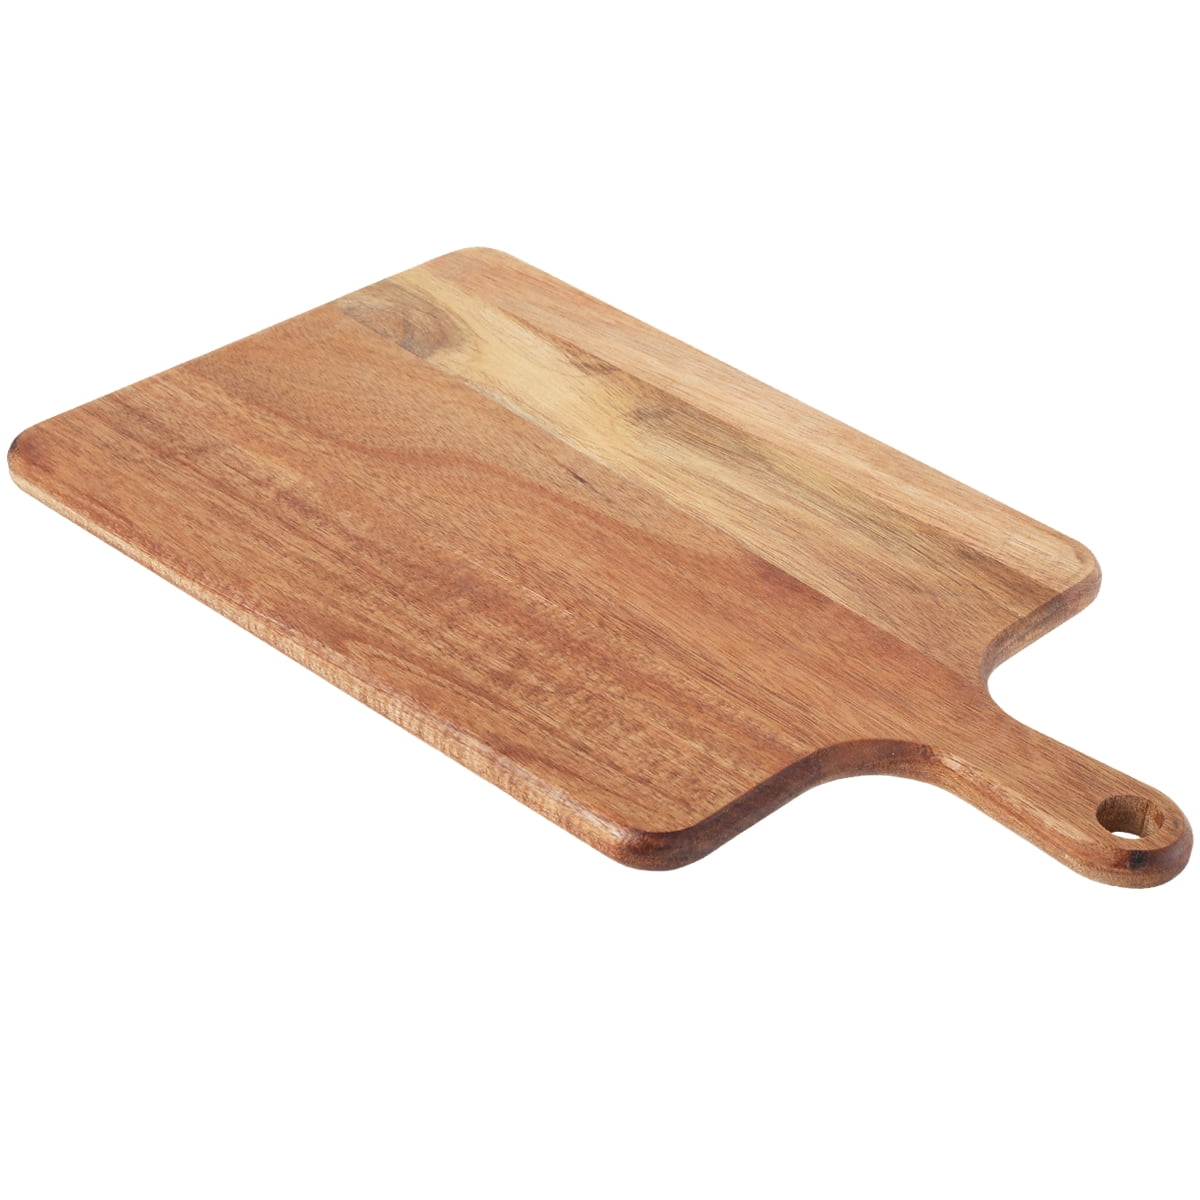 ABUKY Acacia Wood Cutting Board with Handle, Kitchen Chopping Board for  Meat Bread Serving Small Food Prepare, Rectangular Cheese Paddle - 15 x 10